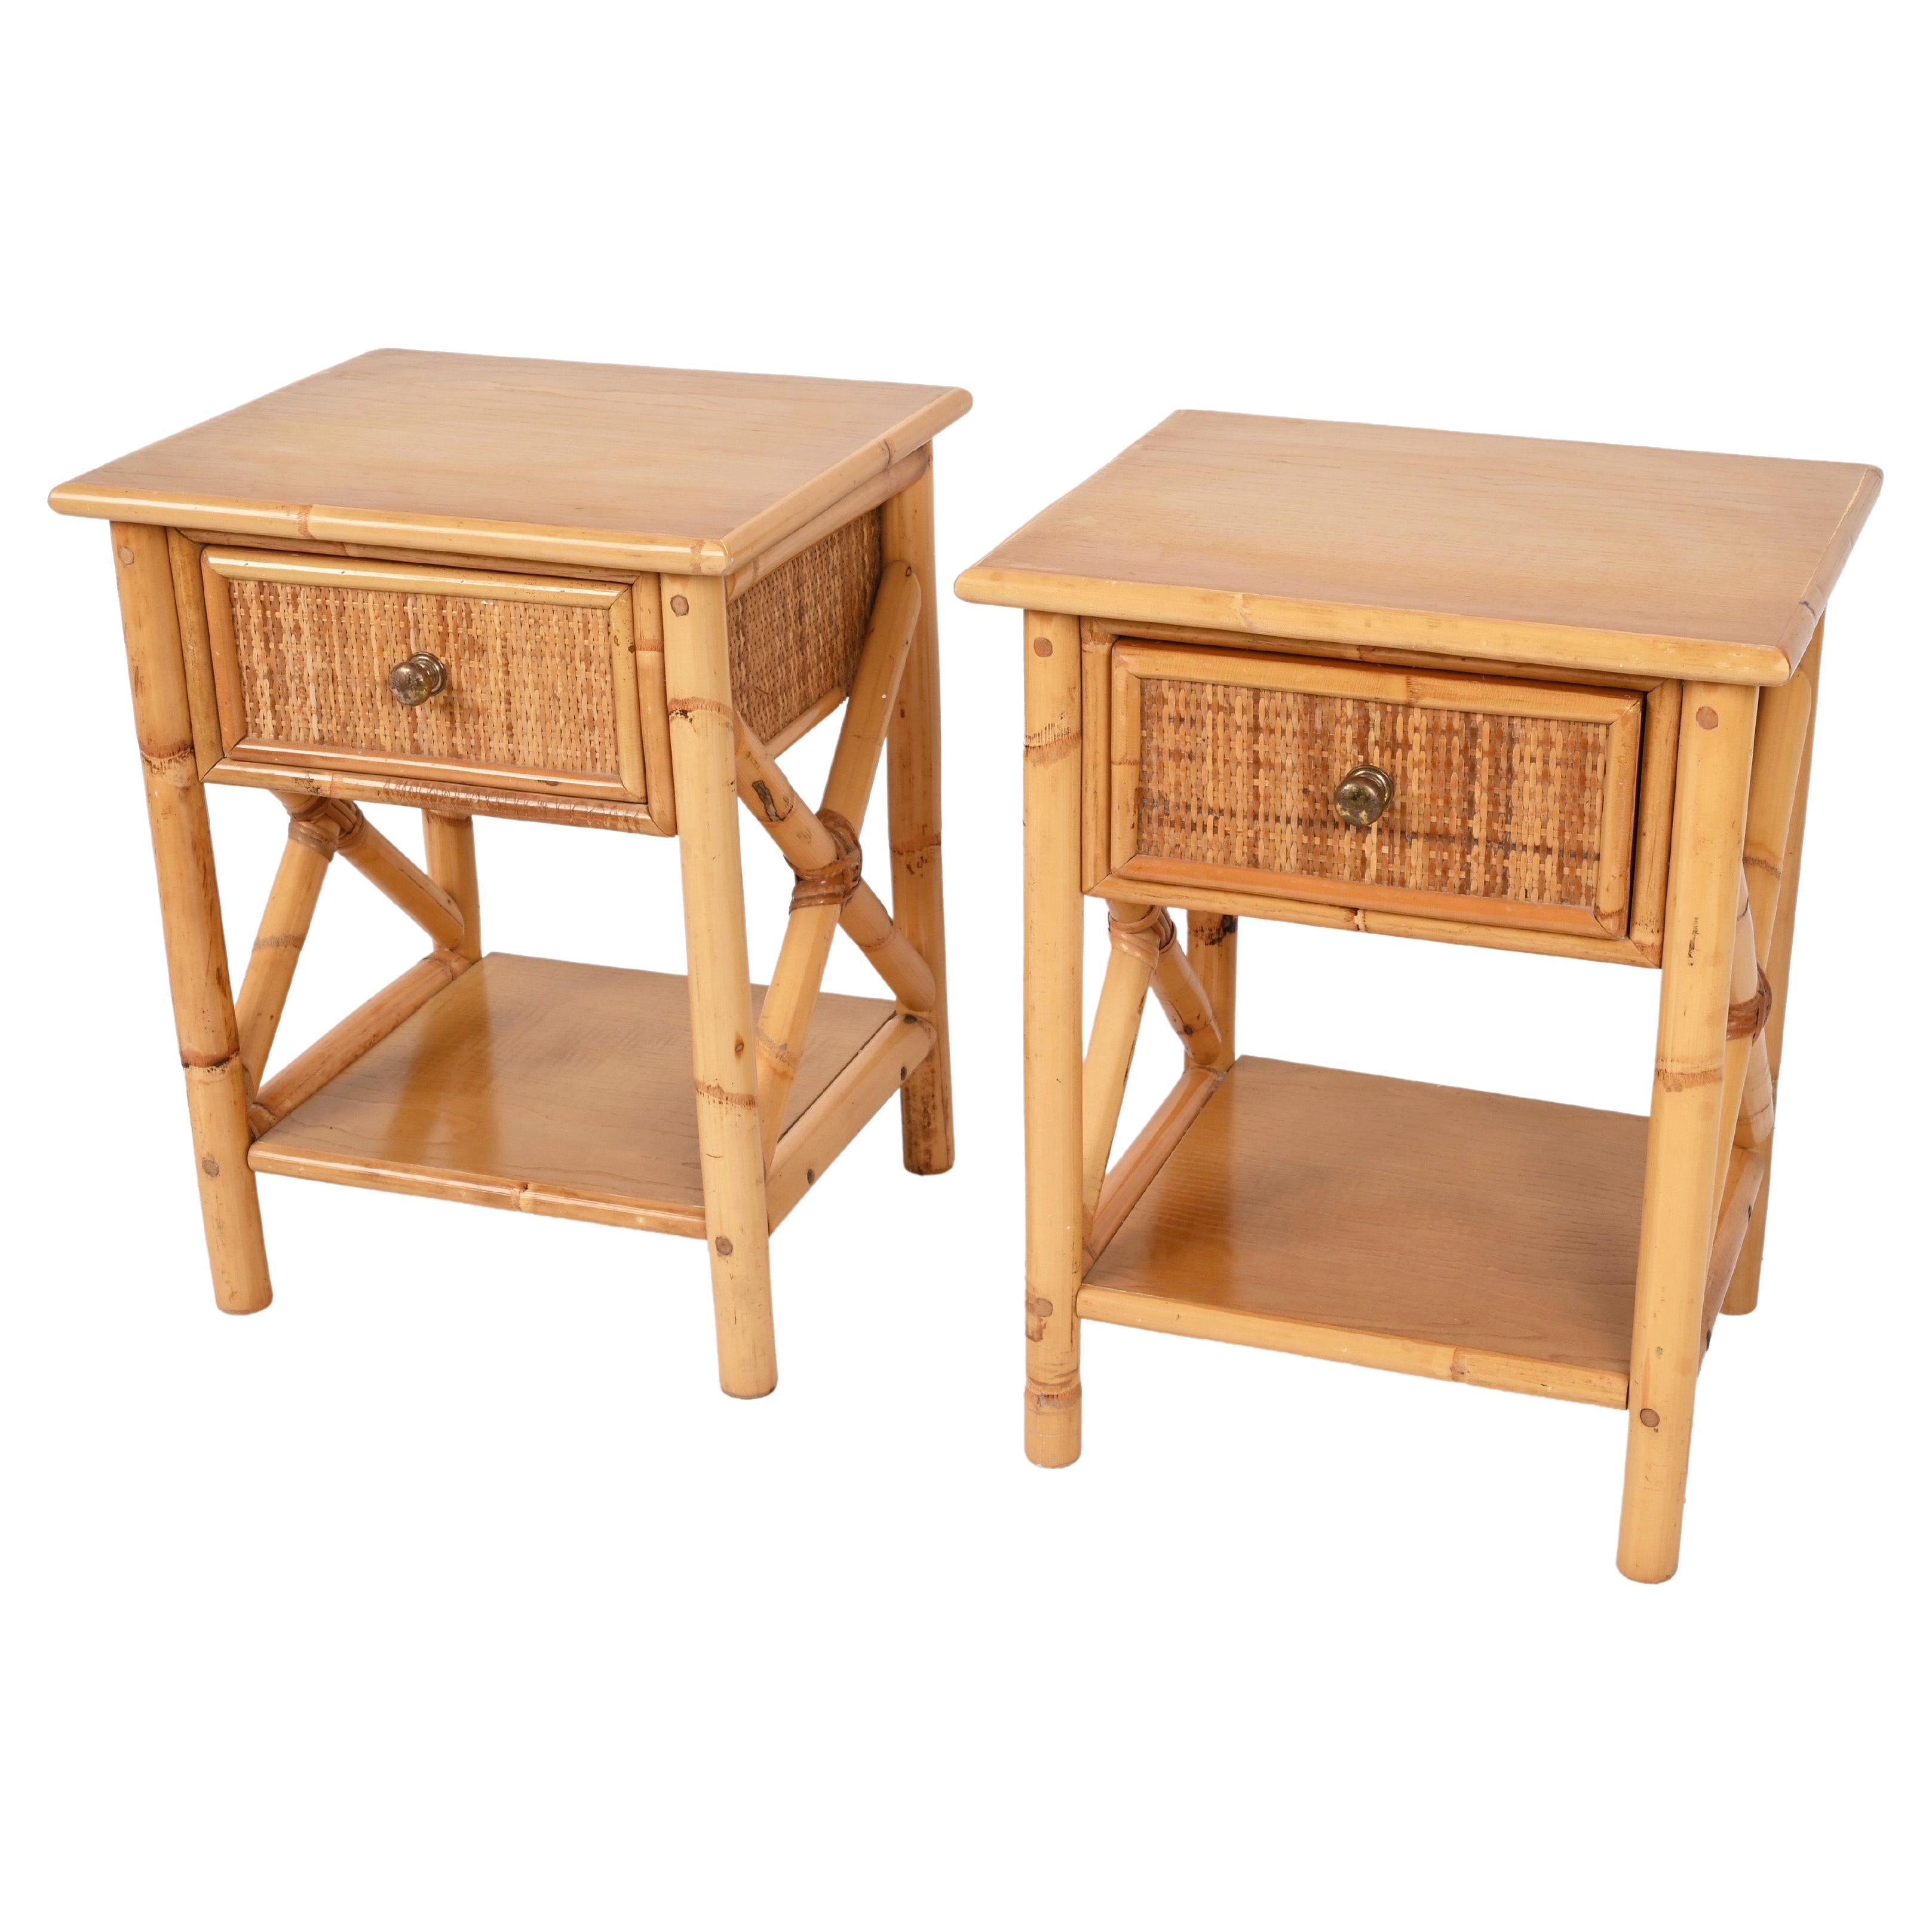 Pair of Mid-Century Modern Bamboo Rattan and Wood Italian Bedside Tables, 1980s